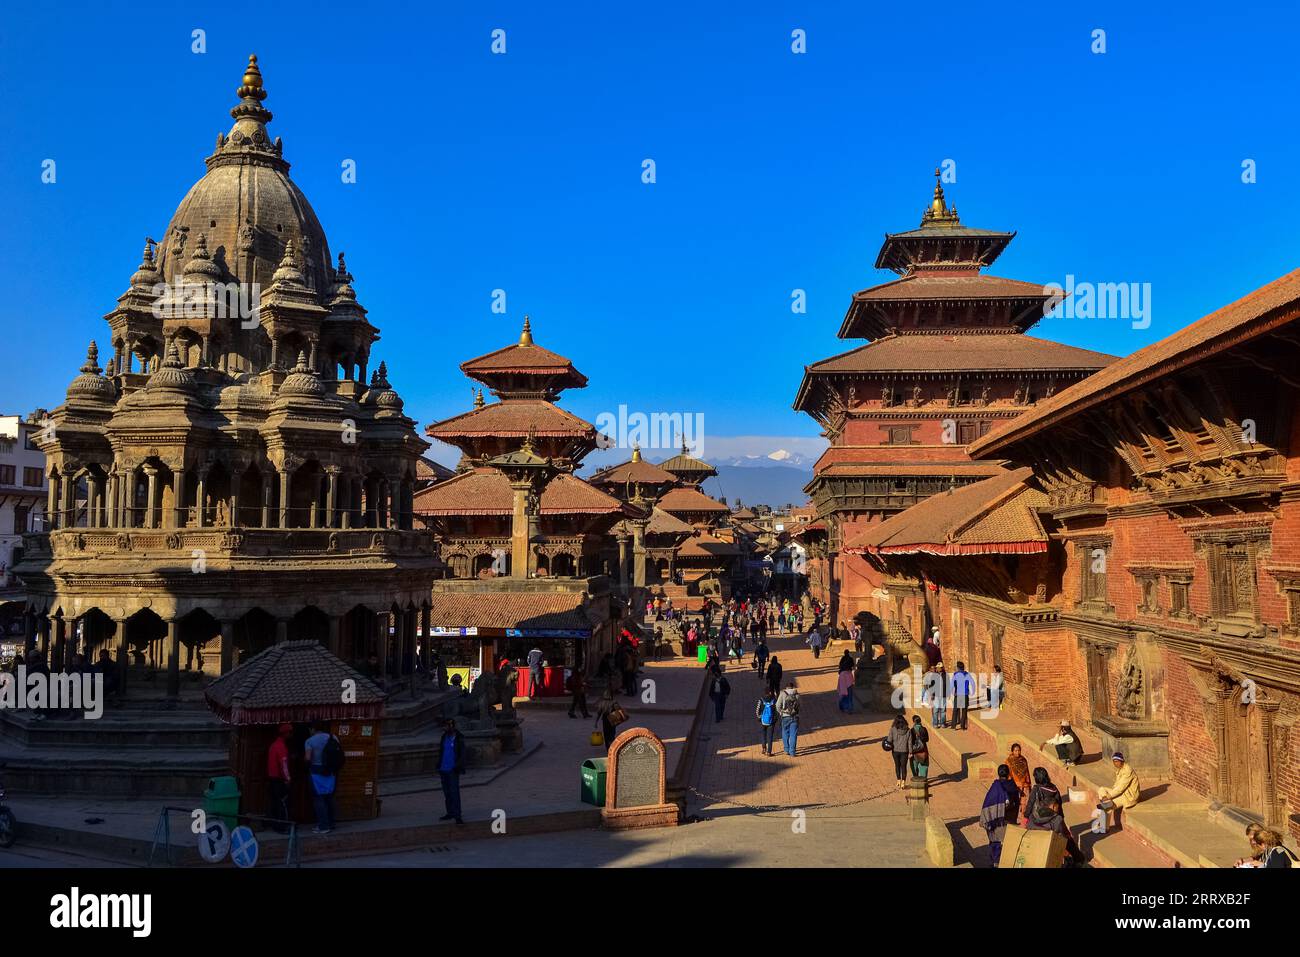 Durbar (royal palace) Square in 2014 (before the earthquake), Kathmandu, Nepal. A UNESCO World Heritage site. Stock Photo